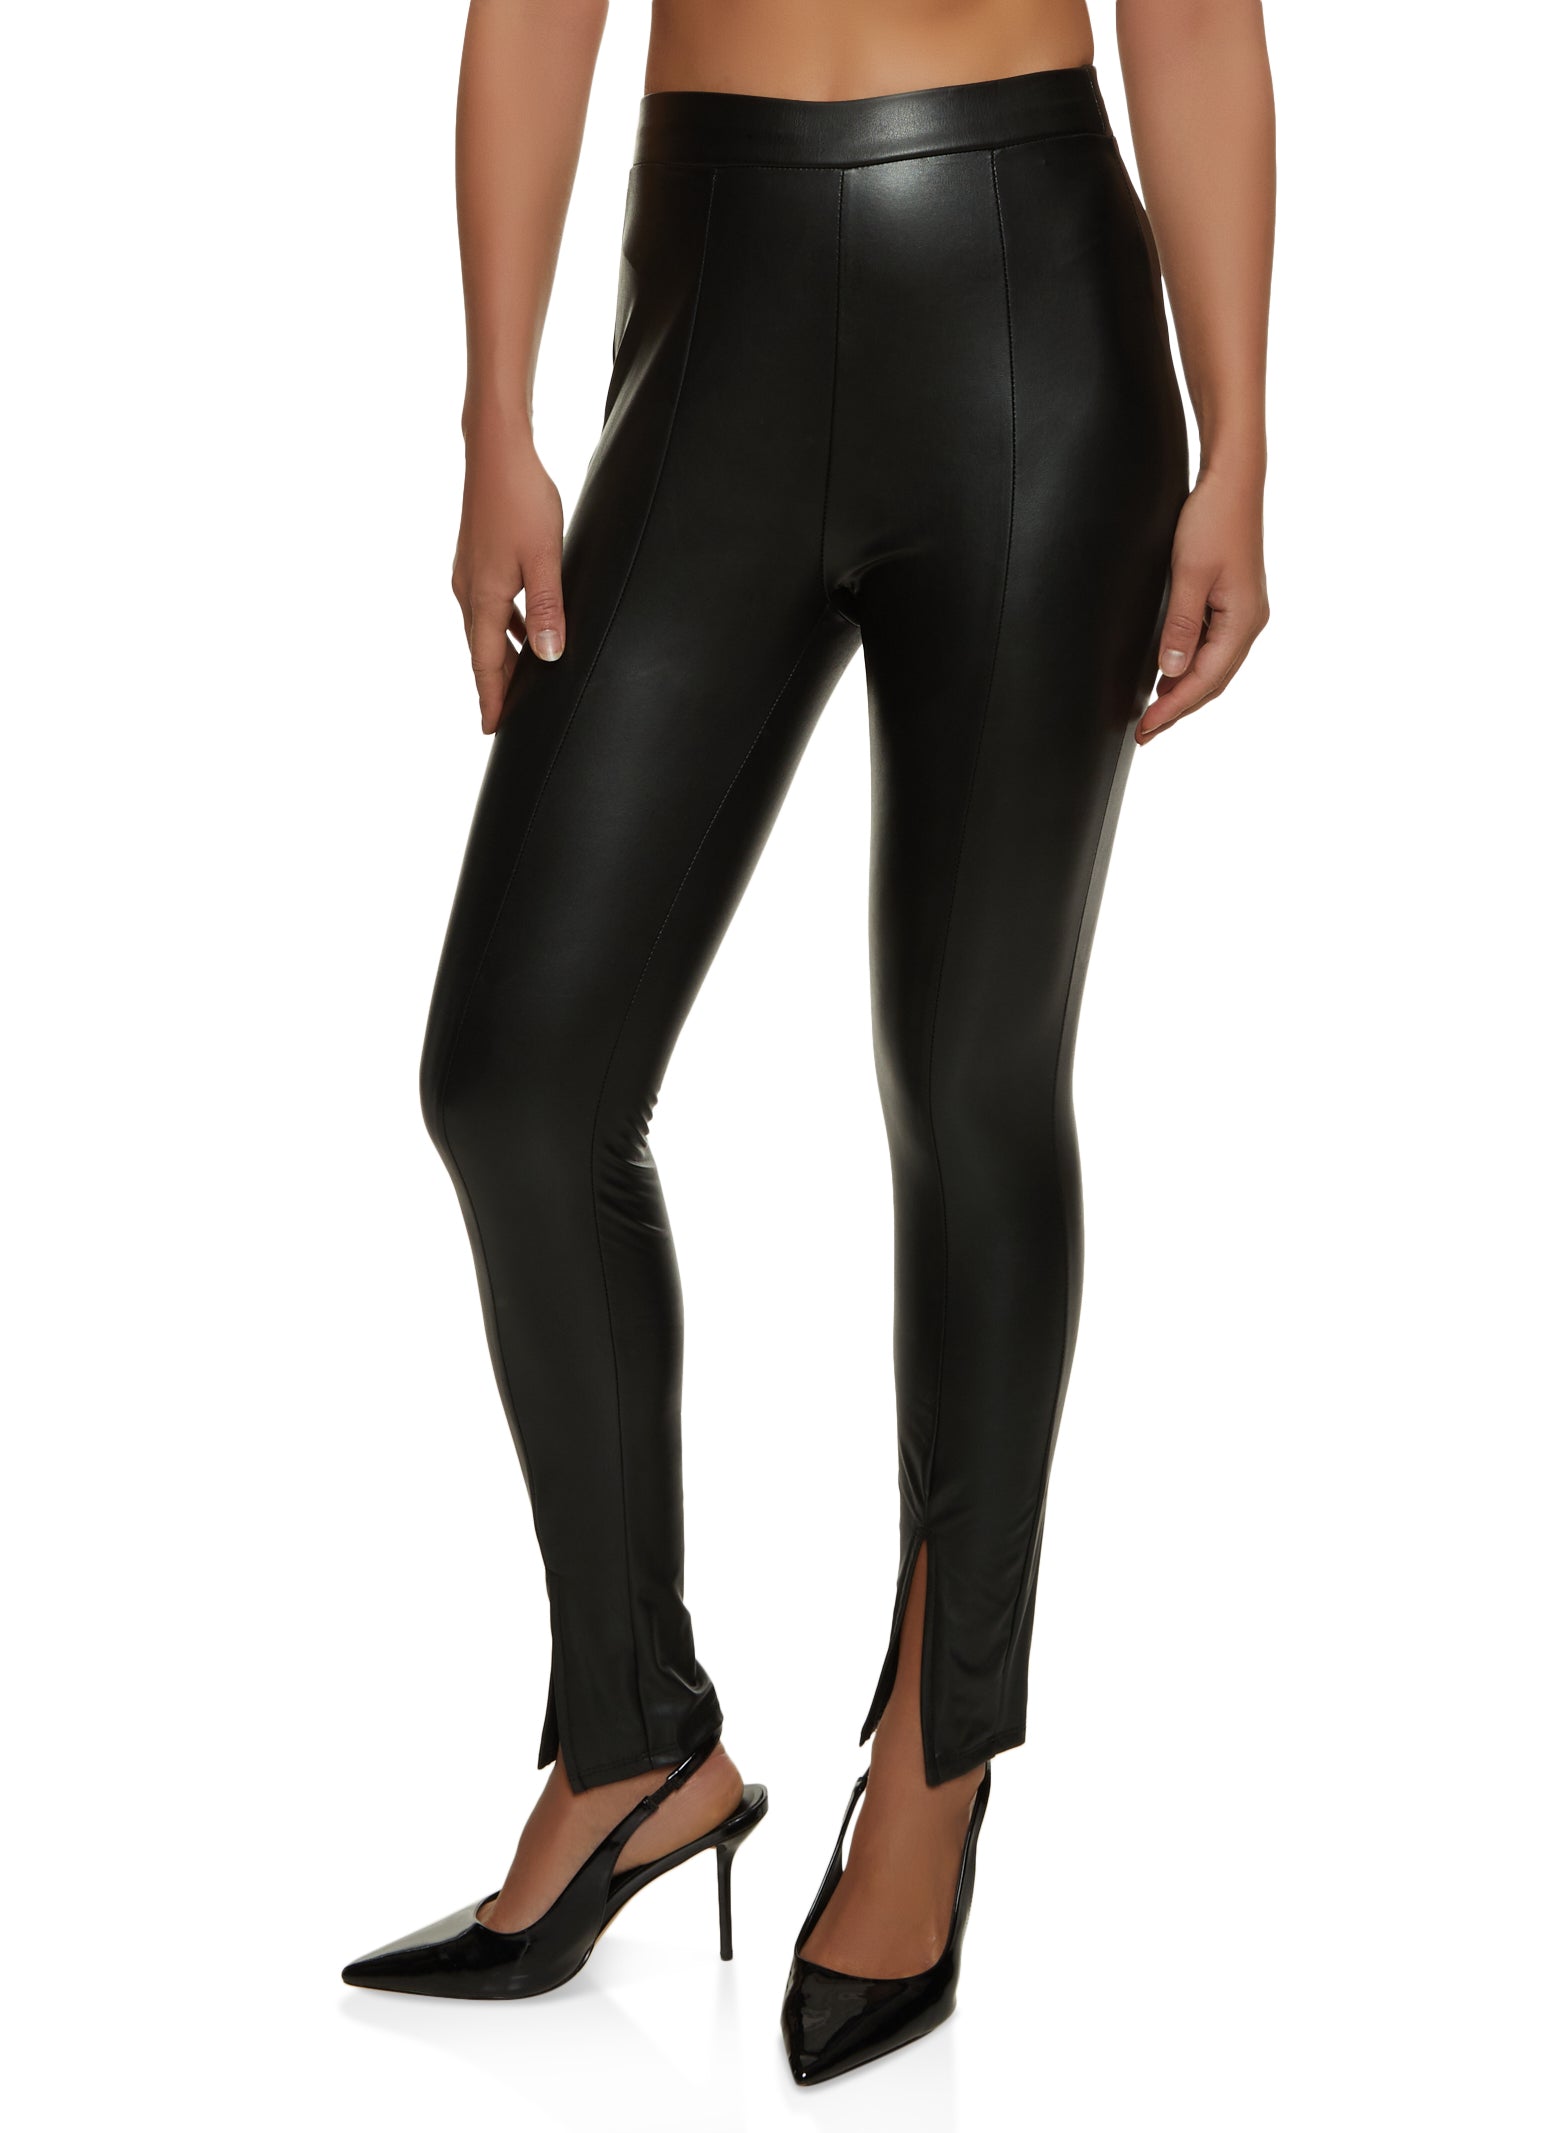 Revamped, Pants & Jumpsuits, Revamped Black Faux Leather High Waisted Zipper  Moto Leggings Pants